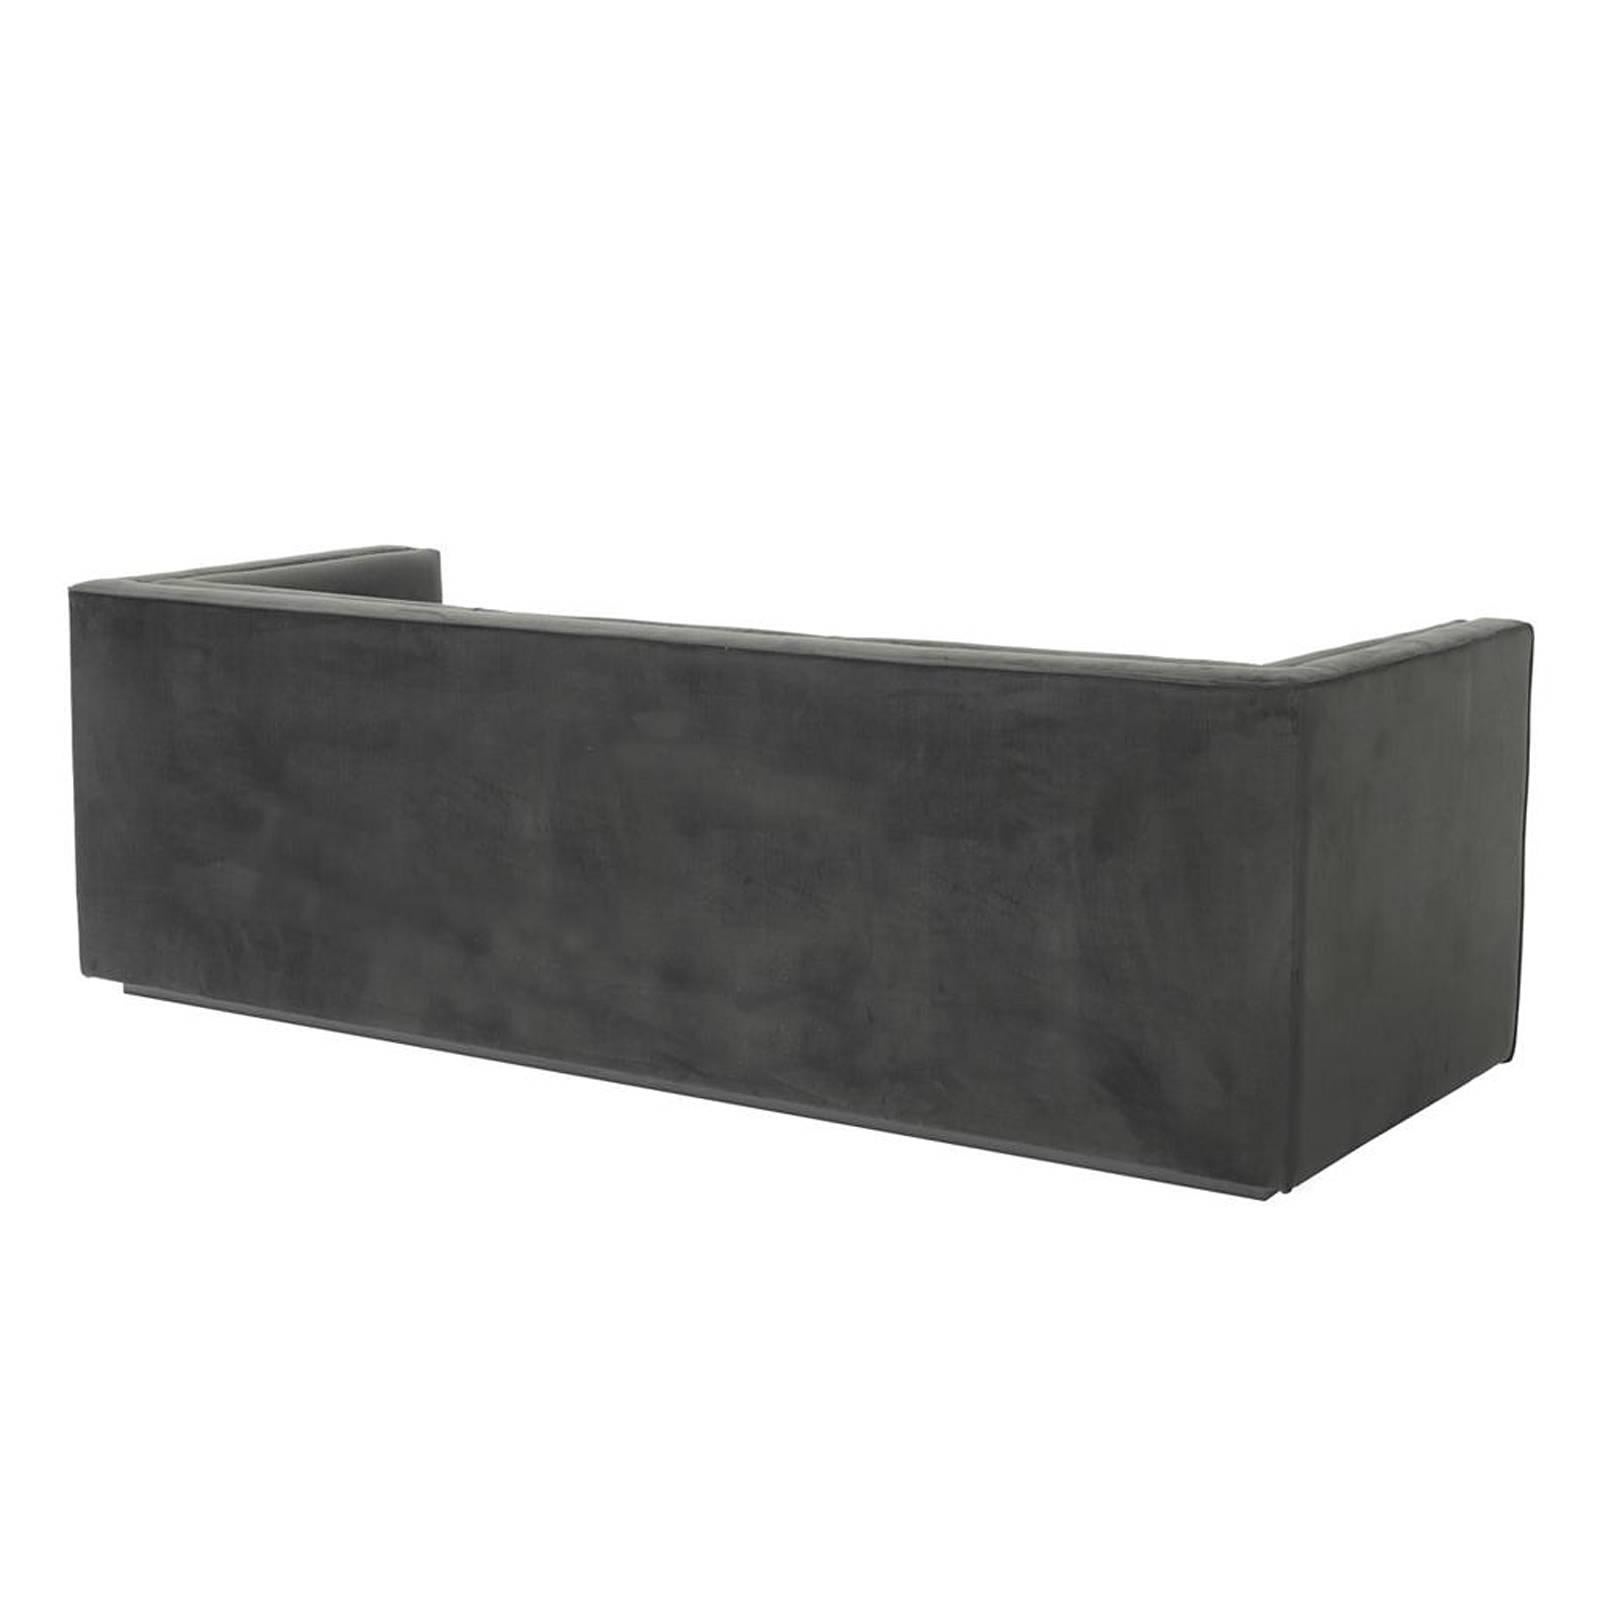 Chinese Becker Sofa with Anthracite Grey Fabric